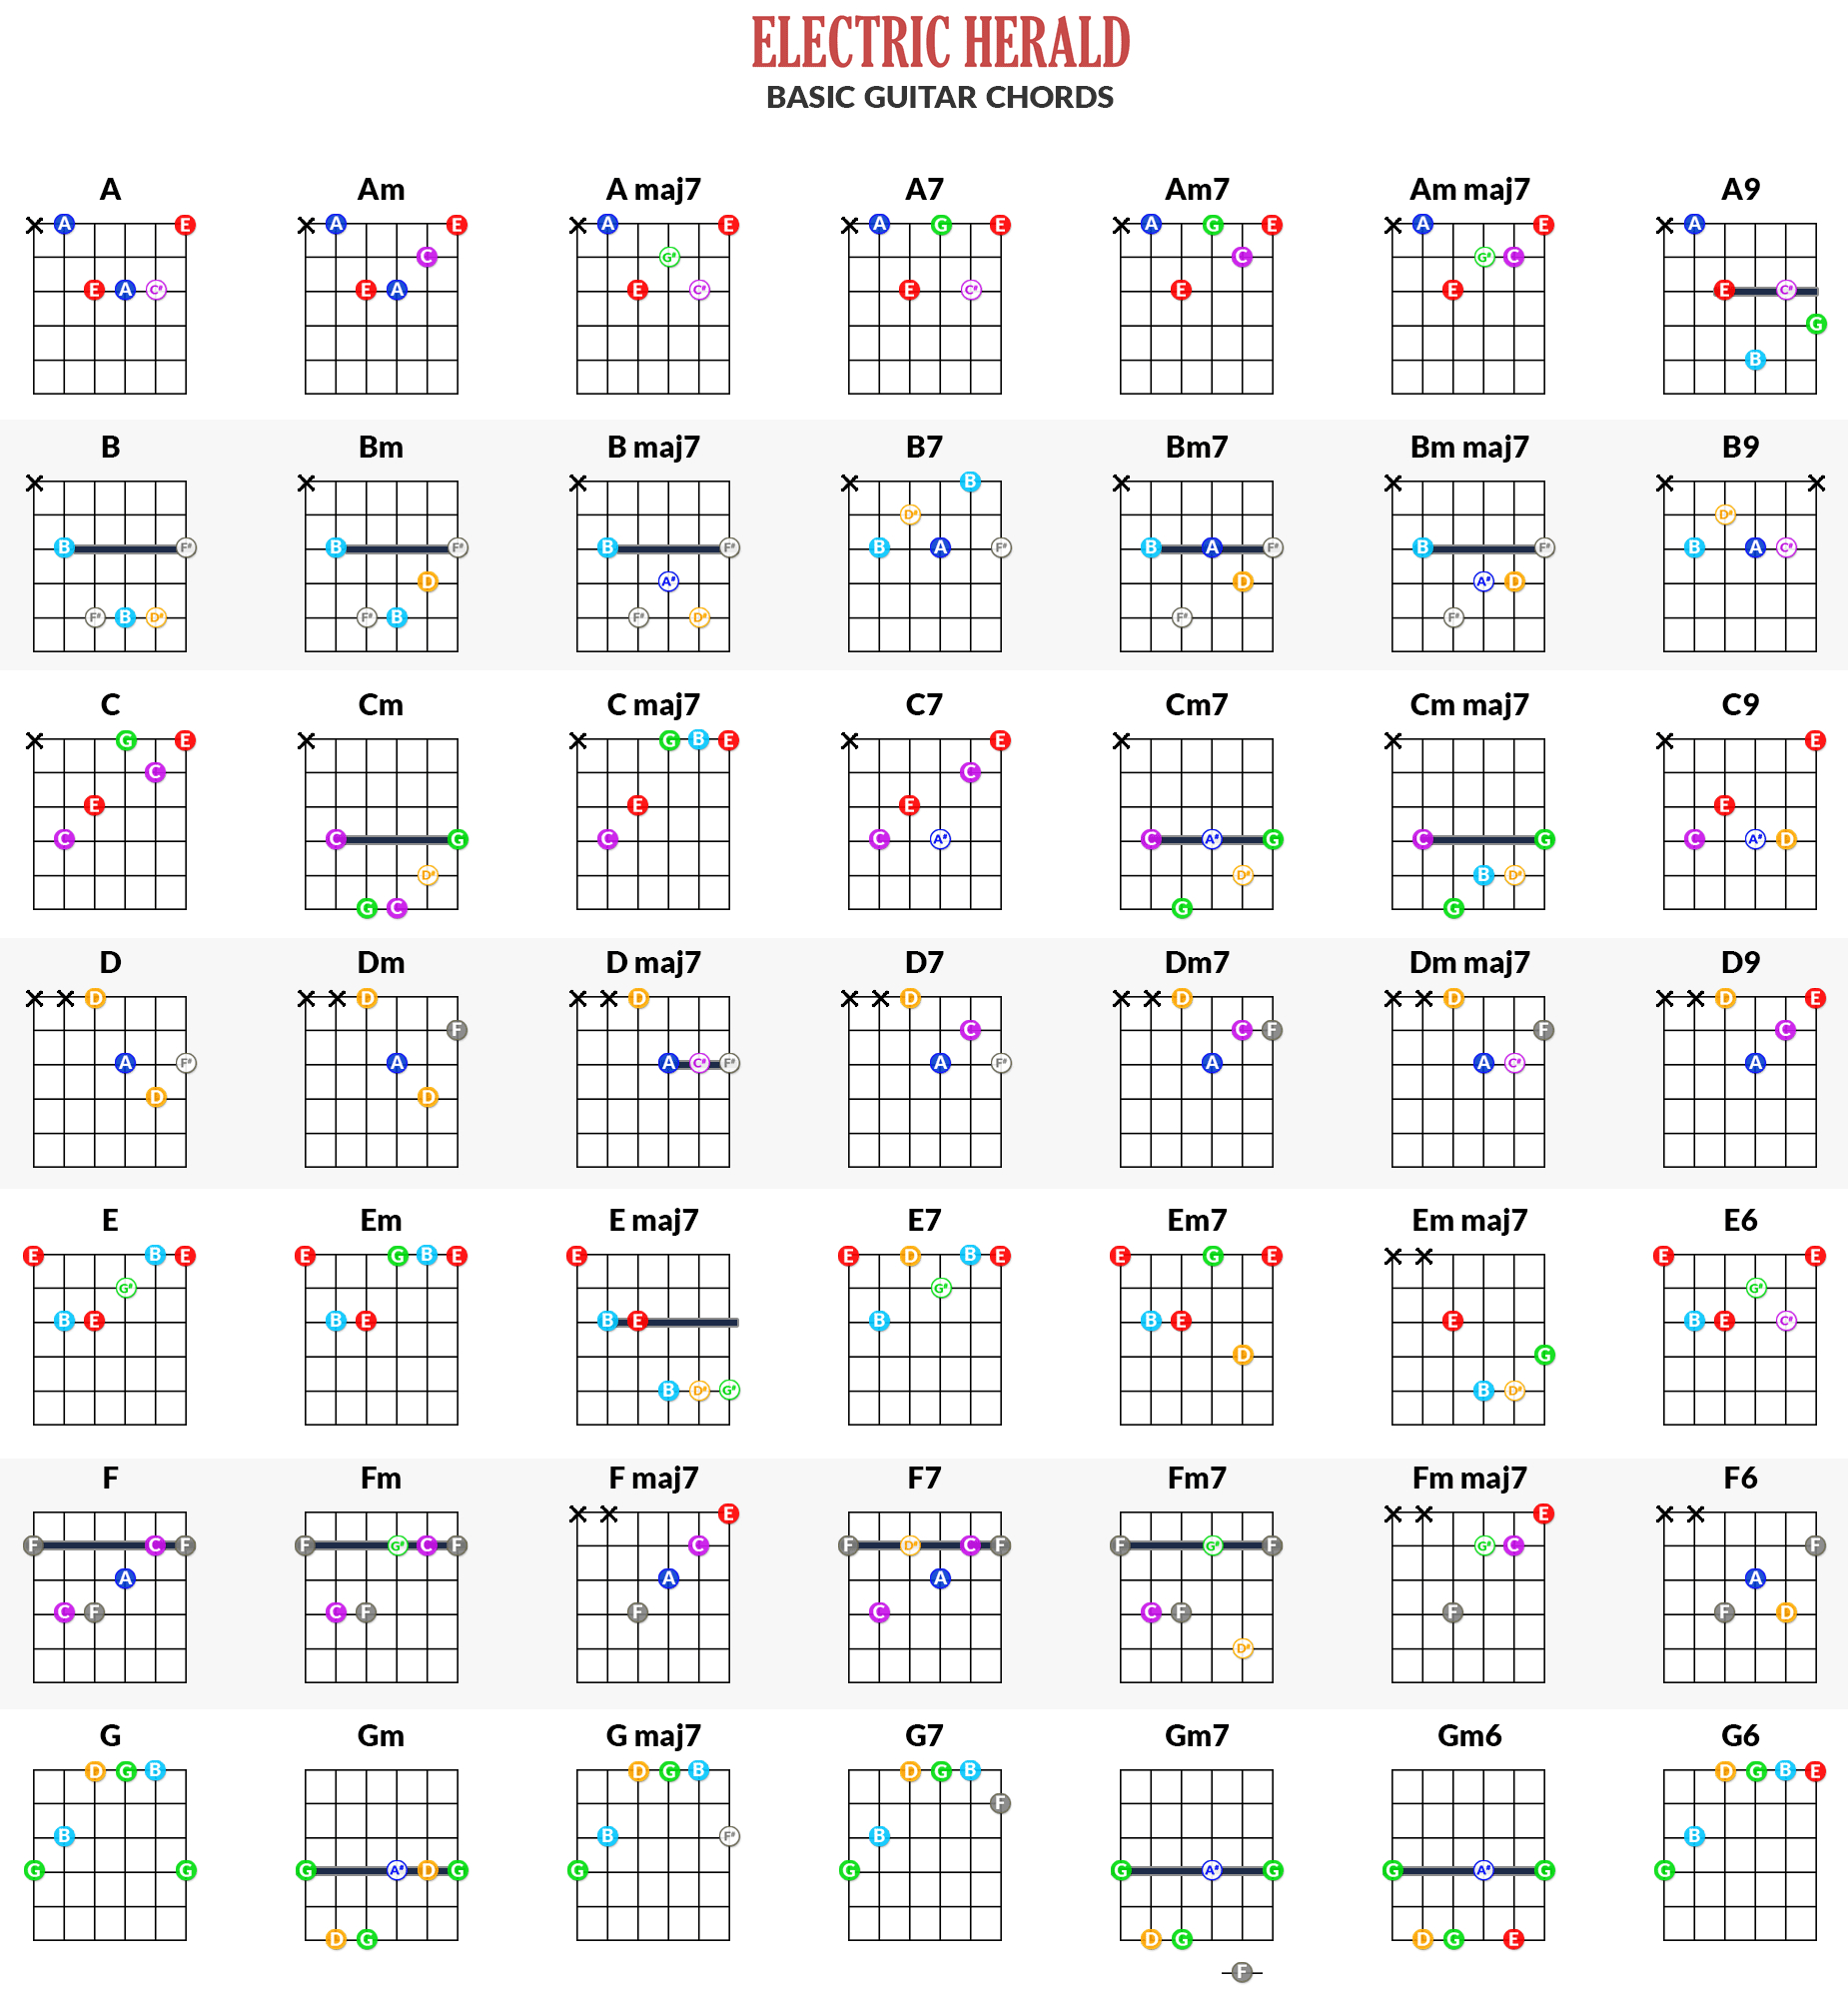 Chords On Guitar Online Guitar Chords Chart Free App Electric Herald